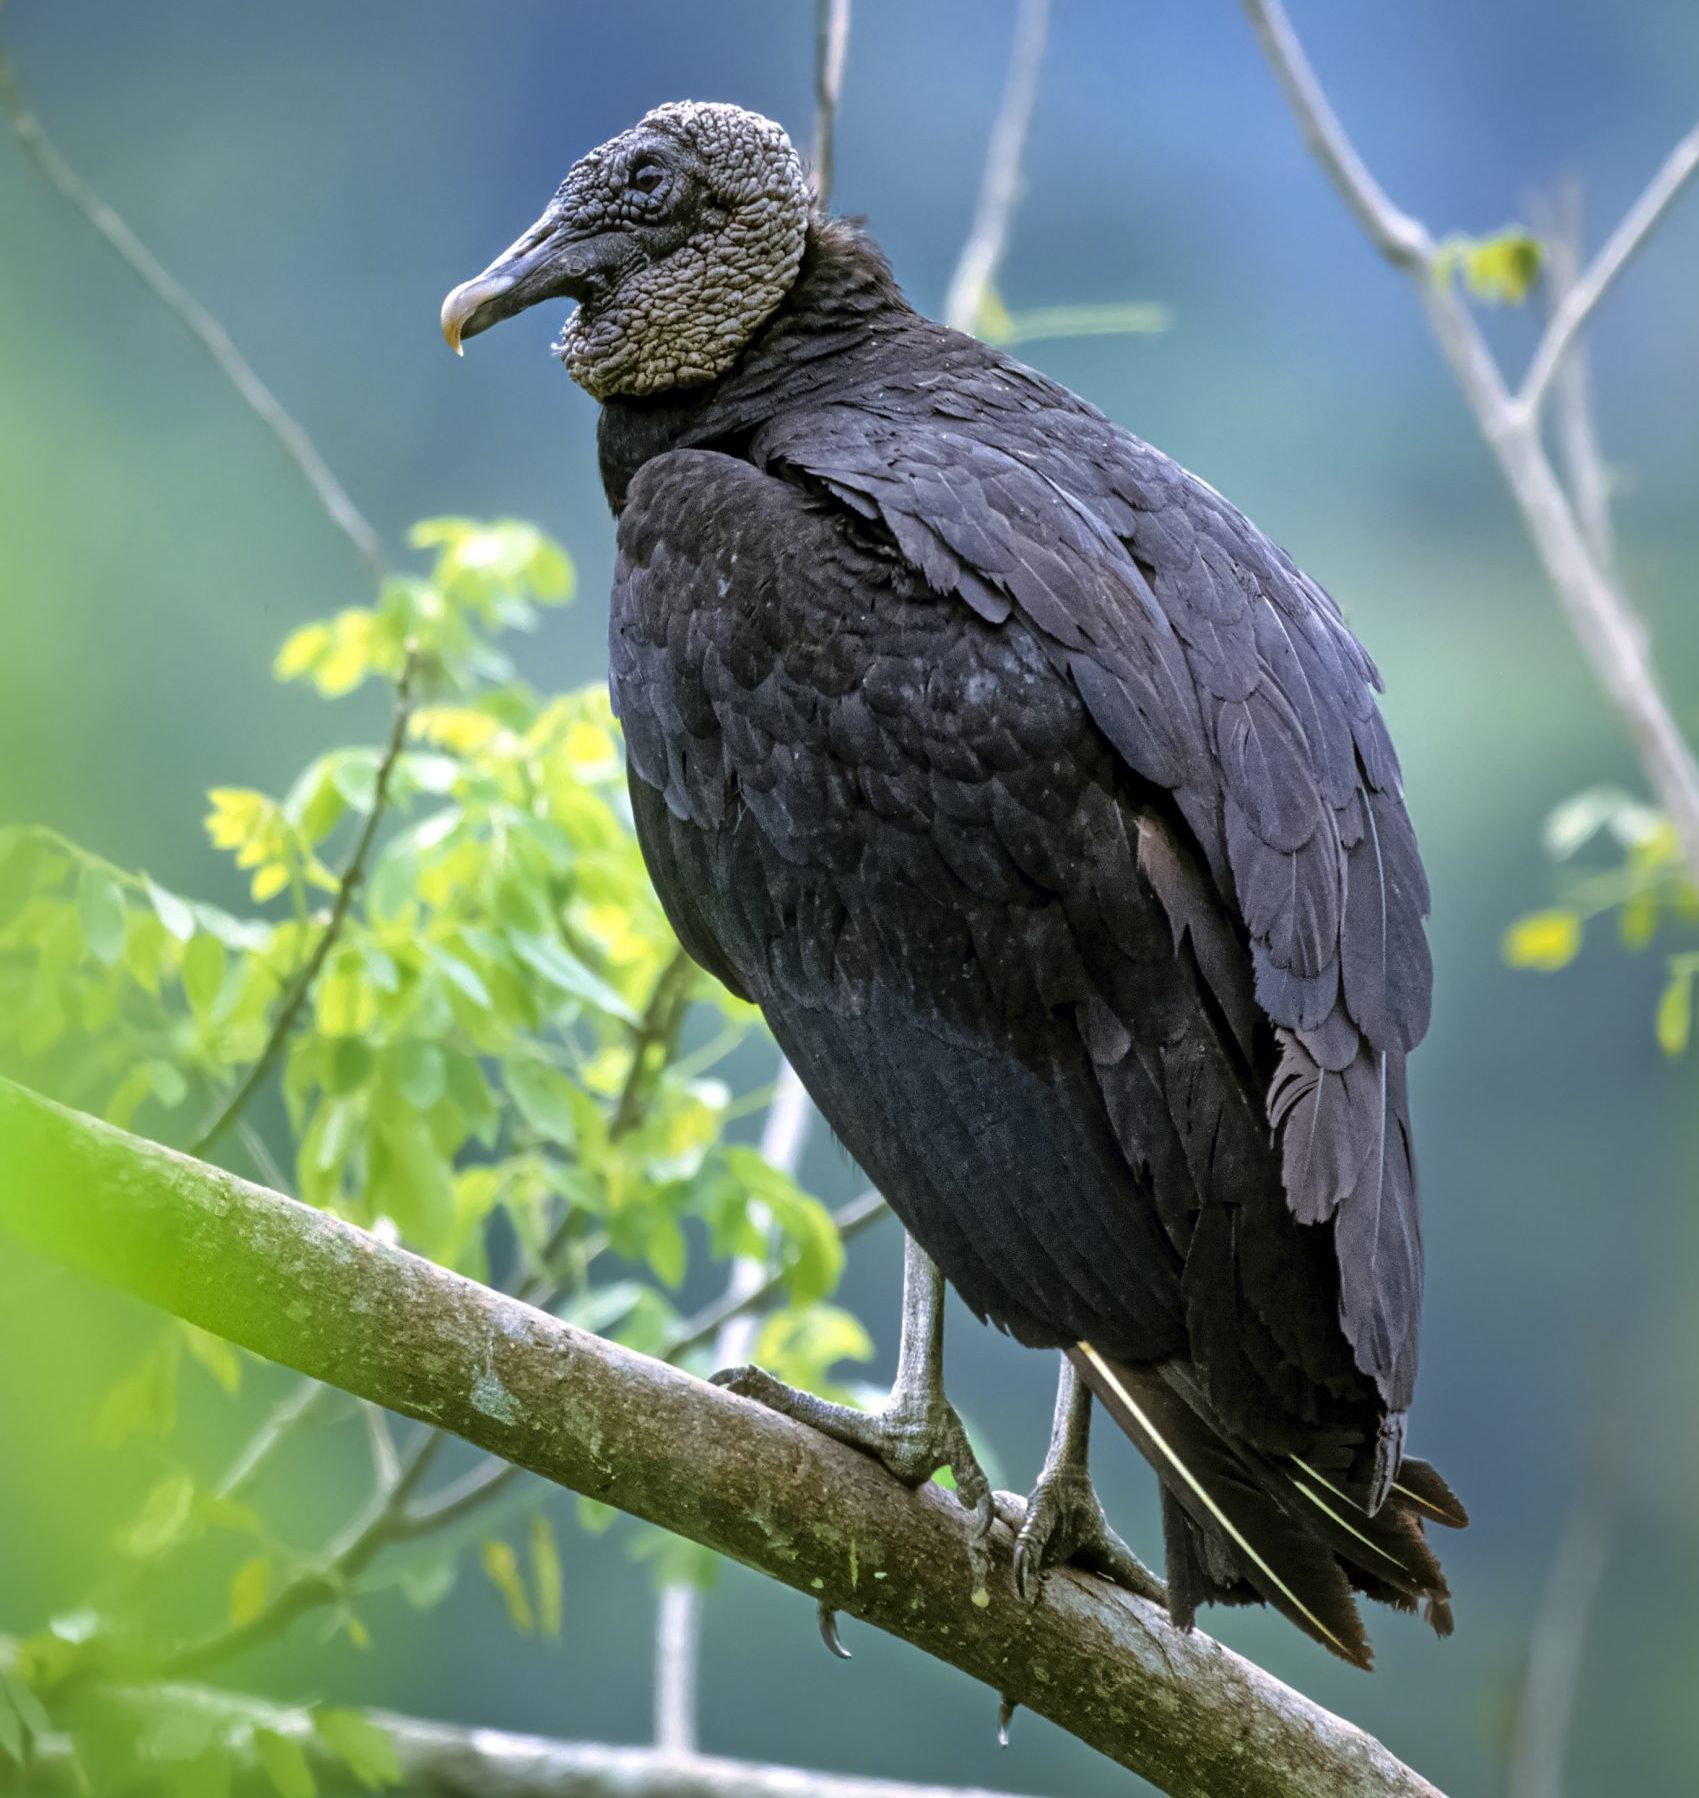 A black vulture gets its name from its black feathers, skin and mostly black bill.